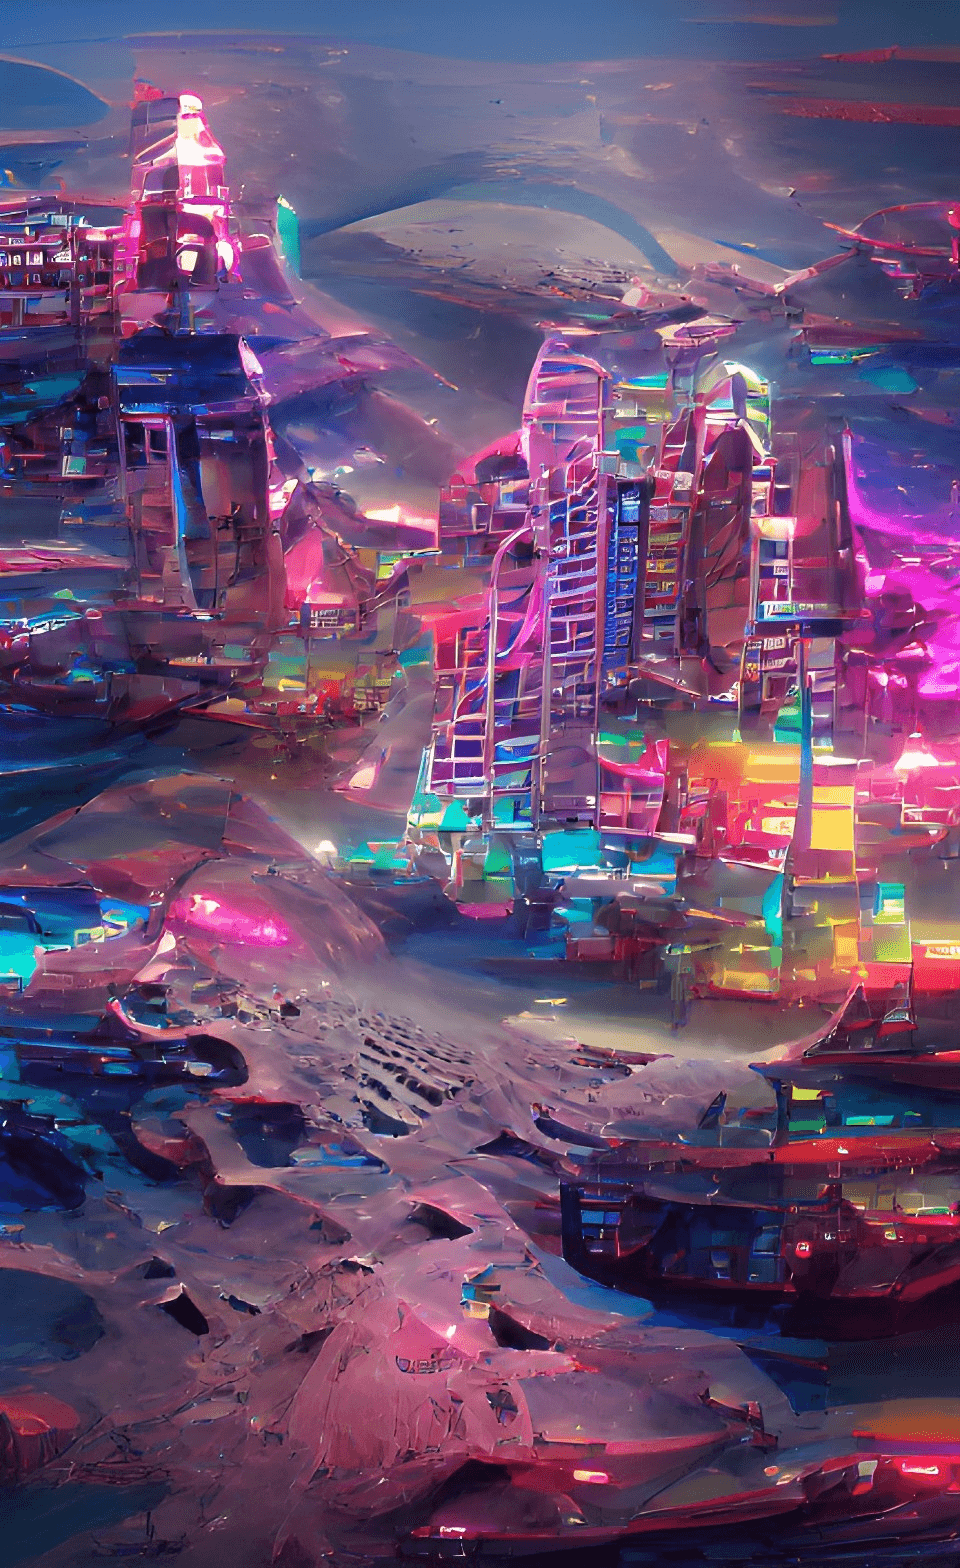 sci fi city destroyed